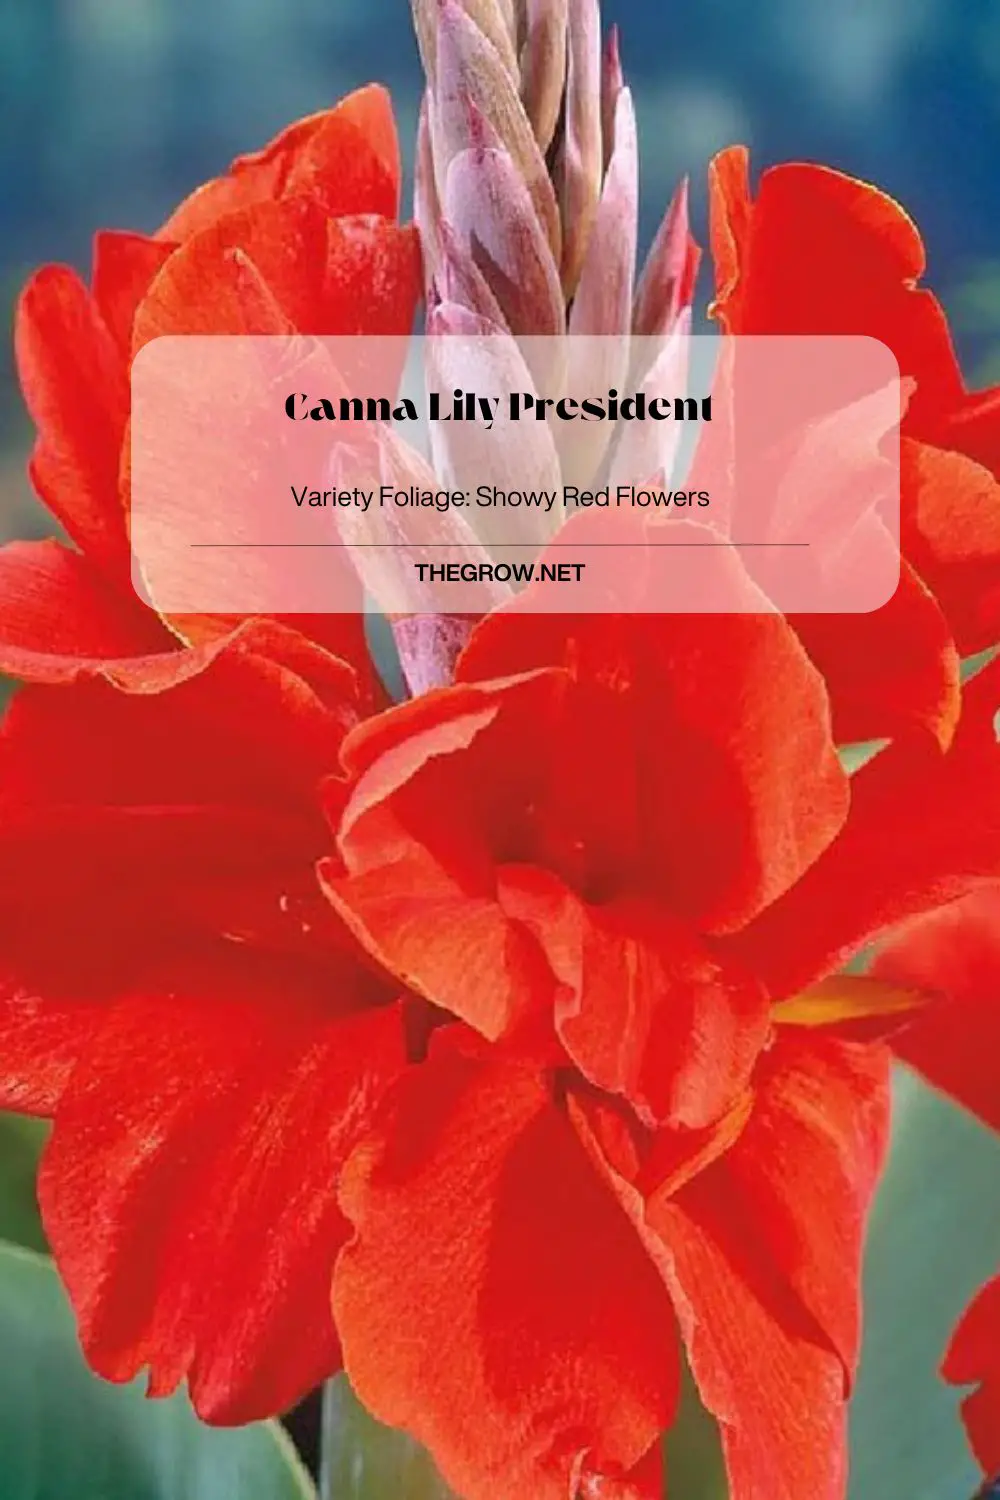 Canna Lily President